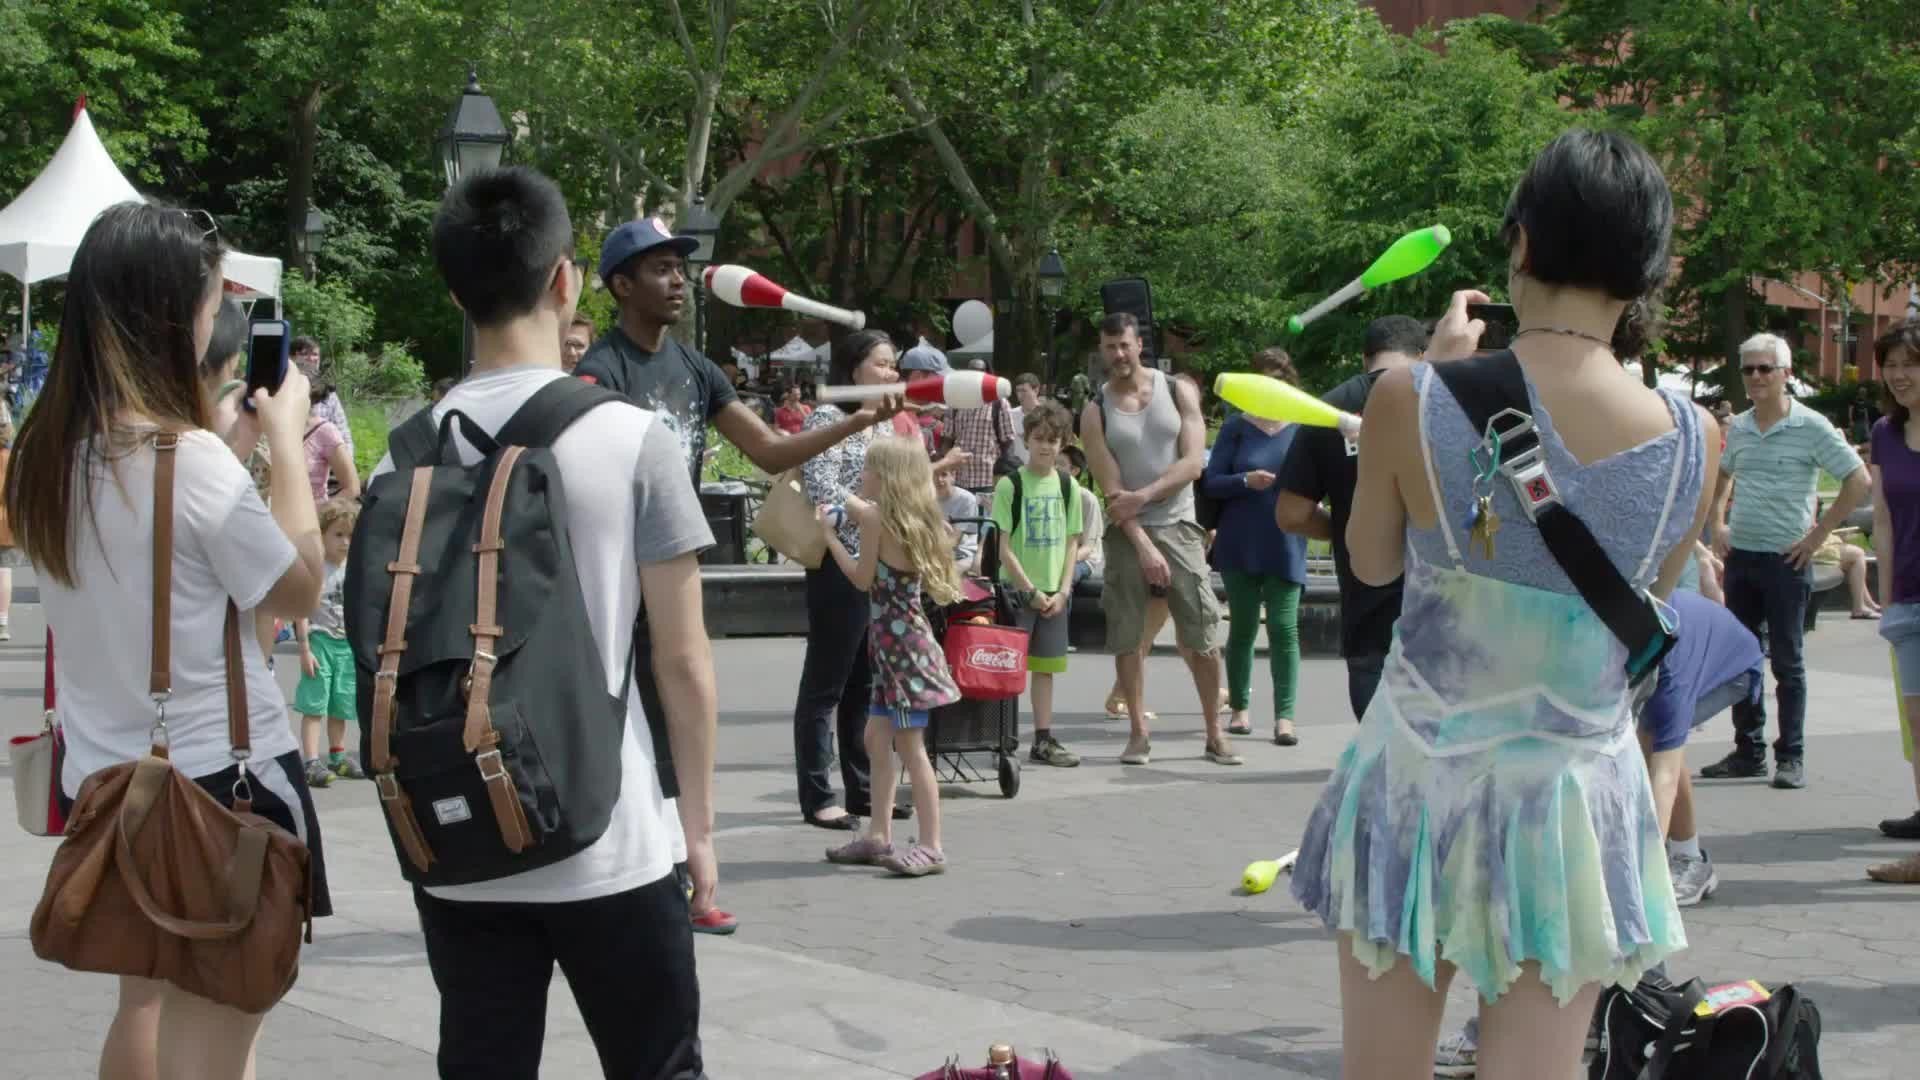 jugglers performing in Washington Square Park in summer - juggling bowling pins in slow motion